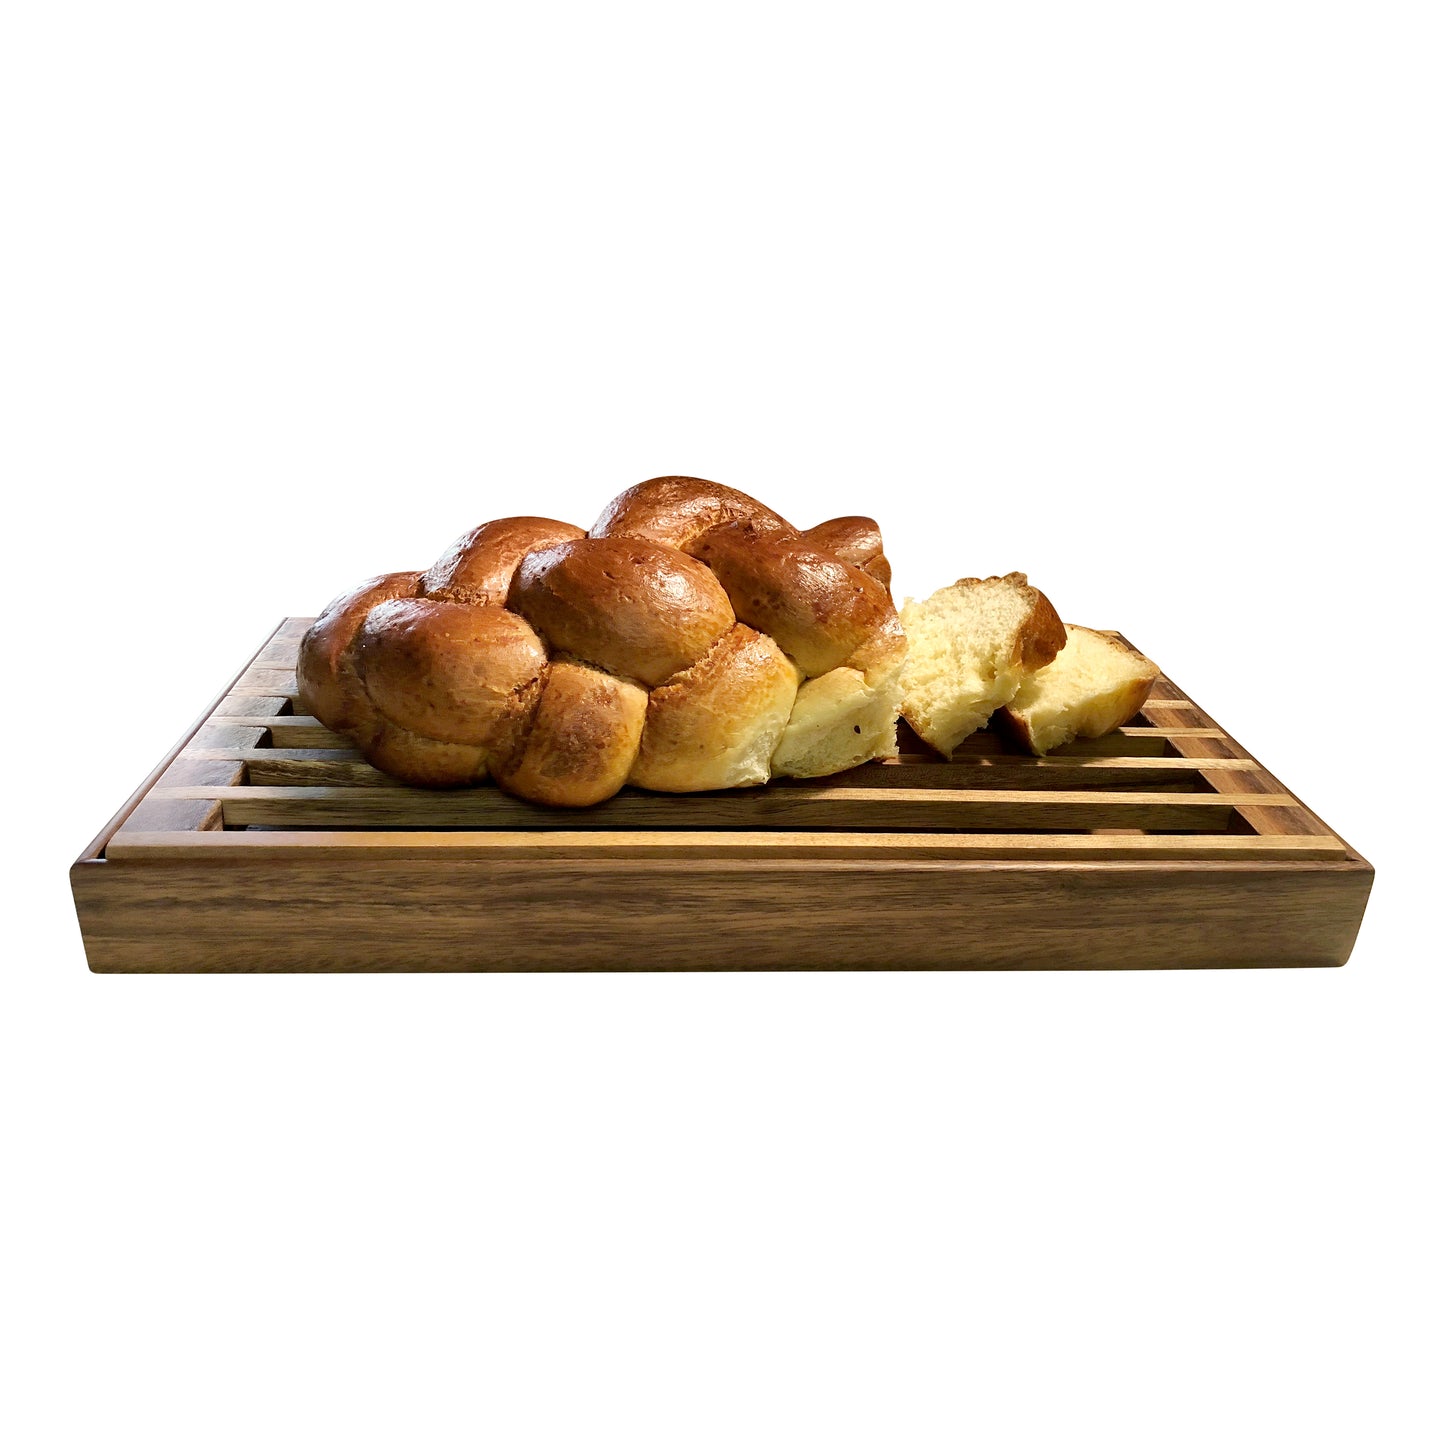 Three-in-One Tray, Trivet and Bread Crumb Catcher